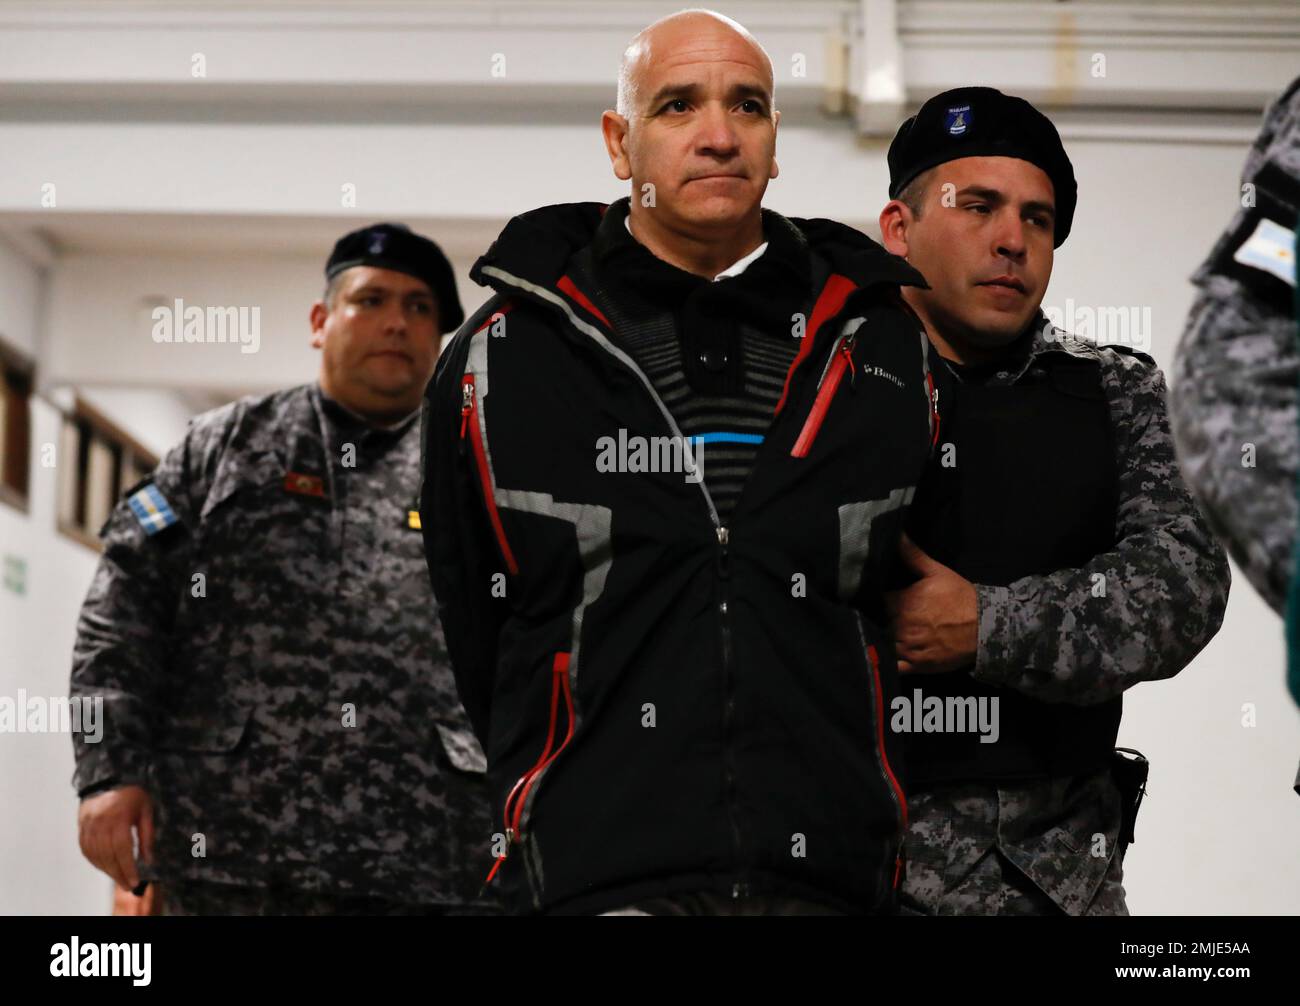 Armando Gomez is escorted from a courtroom after attending the first day of his trial in Mendoza, Argentina, Monday, Aug. 5, 2019. Gomez, 63, and two Roman Catholic priests are being tried for cases of alleged abuse against ex-students at the Antonio Provolo Institute for Deaf and Hearing Impaired Children in Mendoza province. (AP Photo/Natacha Pisarenko) Stock Photo